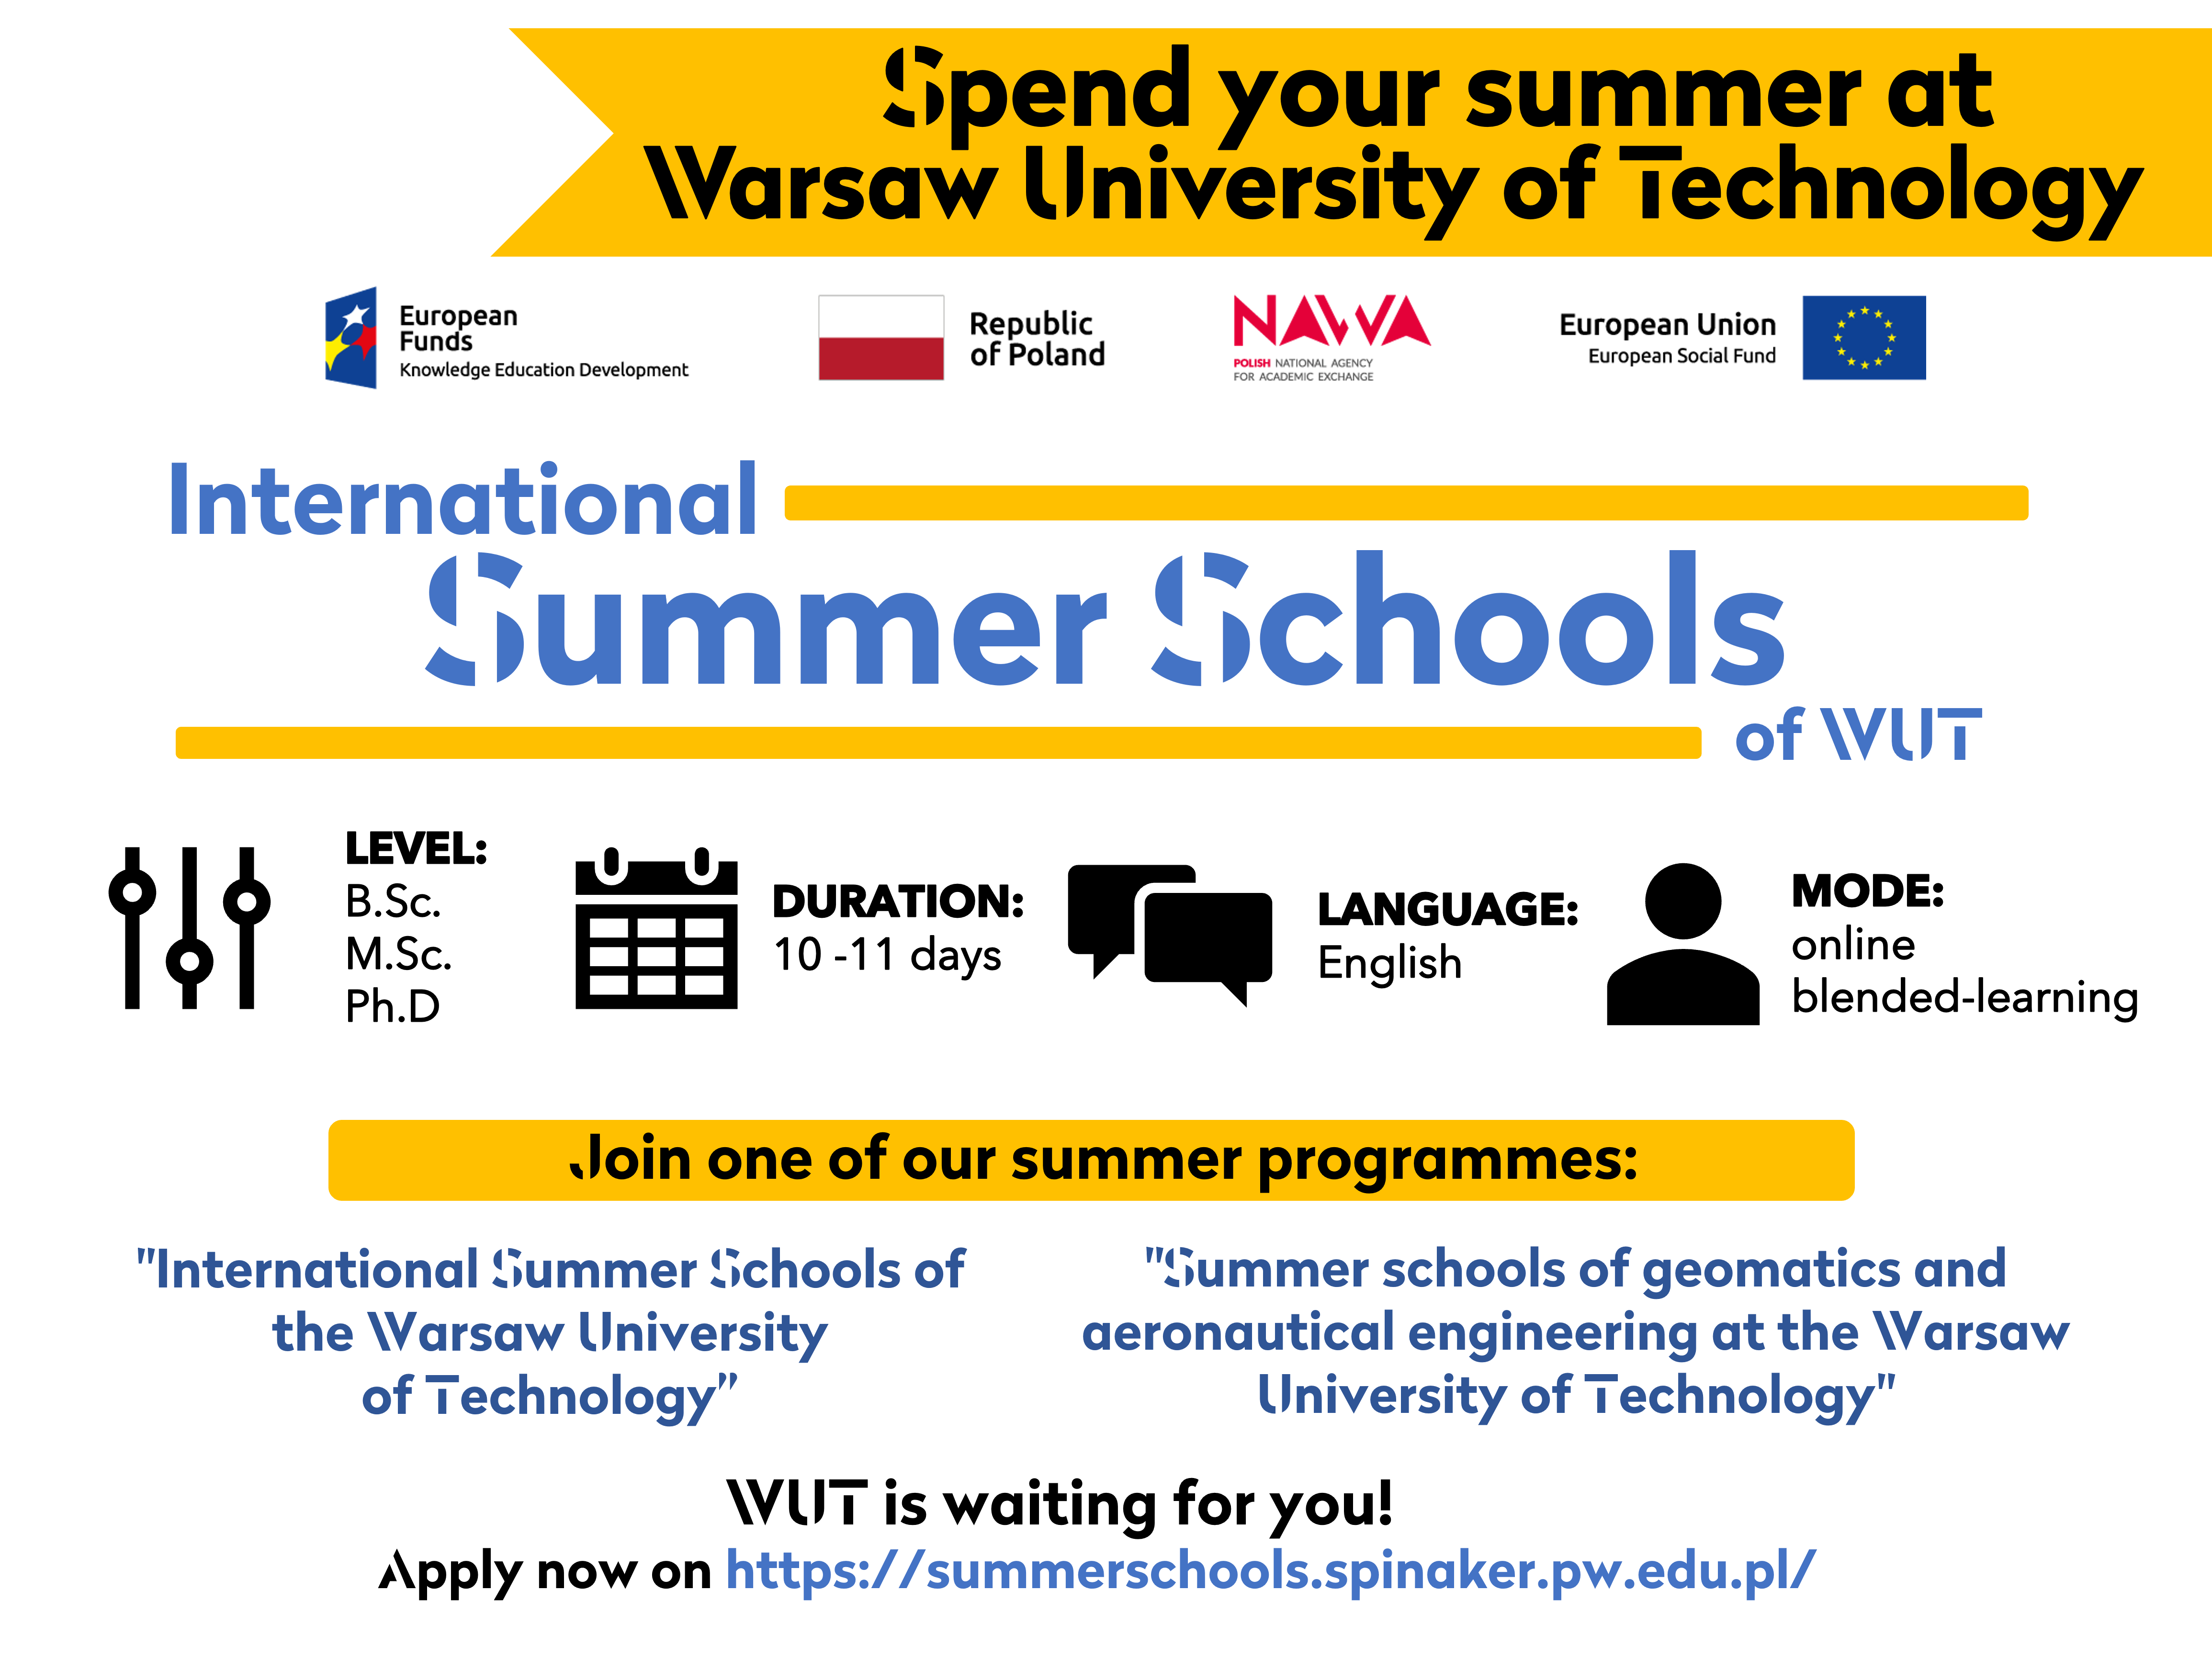 International Summer Schools carried out by the Warsaw University of Technology.